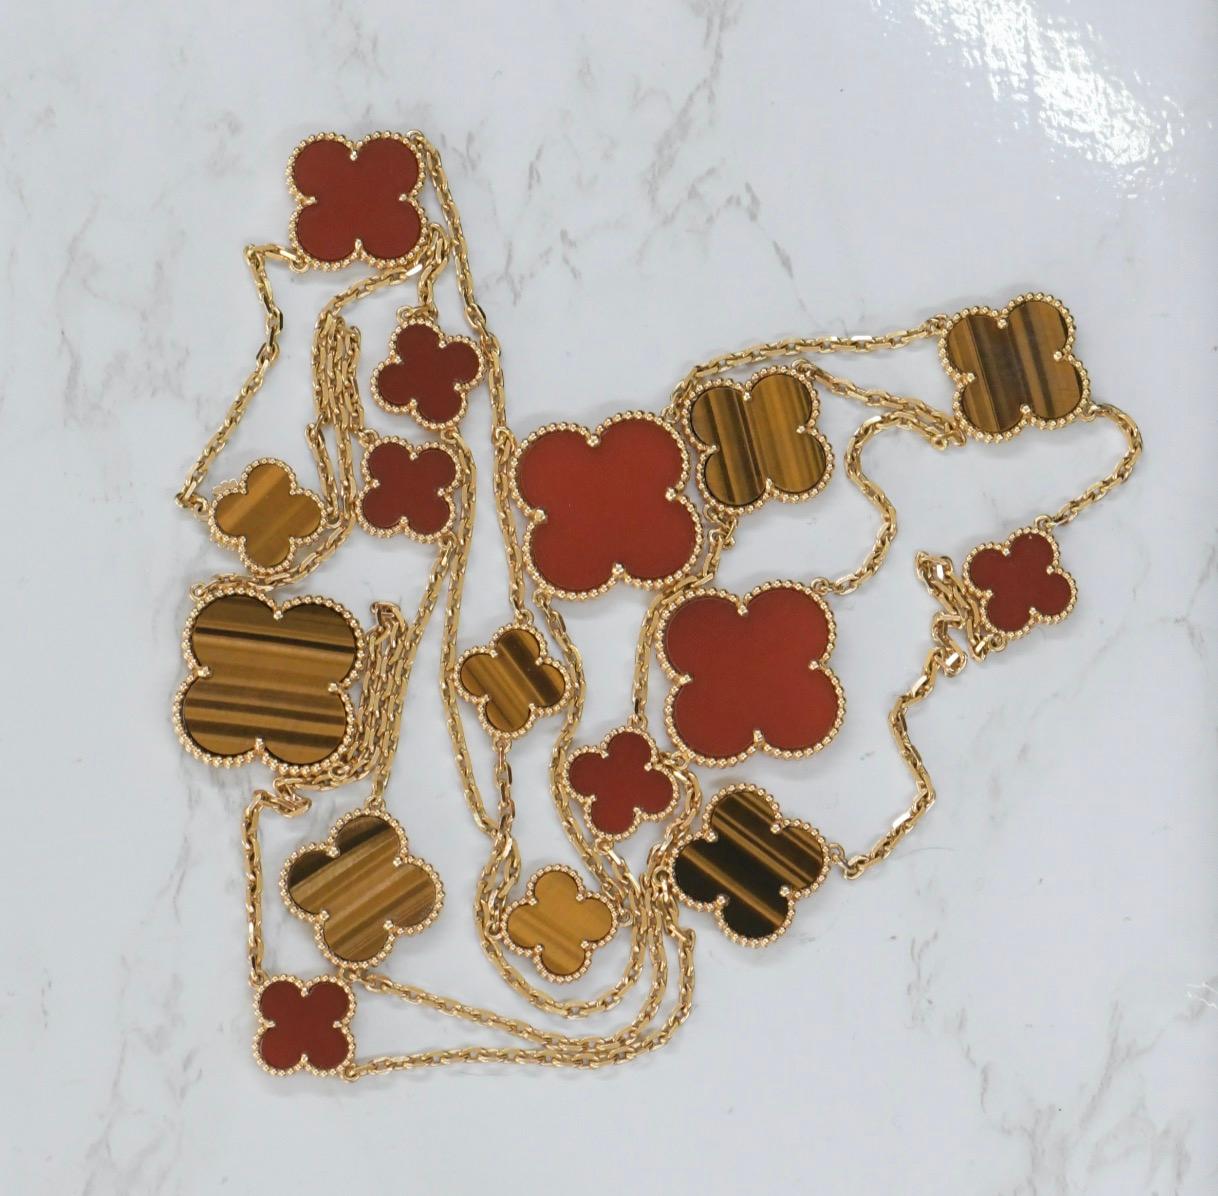 Very Rare Van Cleef & Arpels 18k Gold Tiger Eye Carnelian 16 Motif Magic Alhambra Necklace. This necklace comes with a Van Cleef & Arpels Box 

Dandelion Antiques Code	AT-1957
Brand	                                Van Cleef & Arpels
Model	          